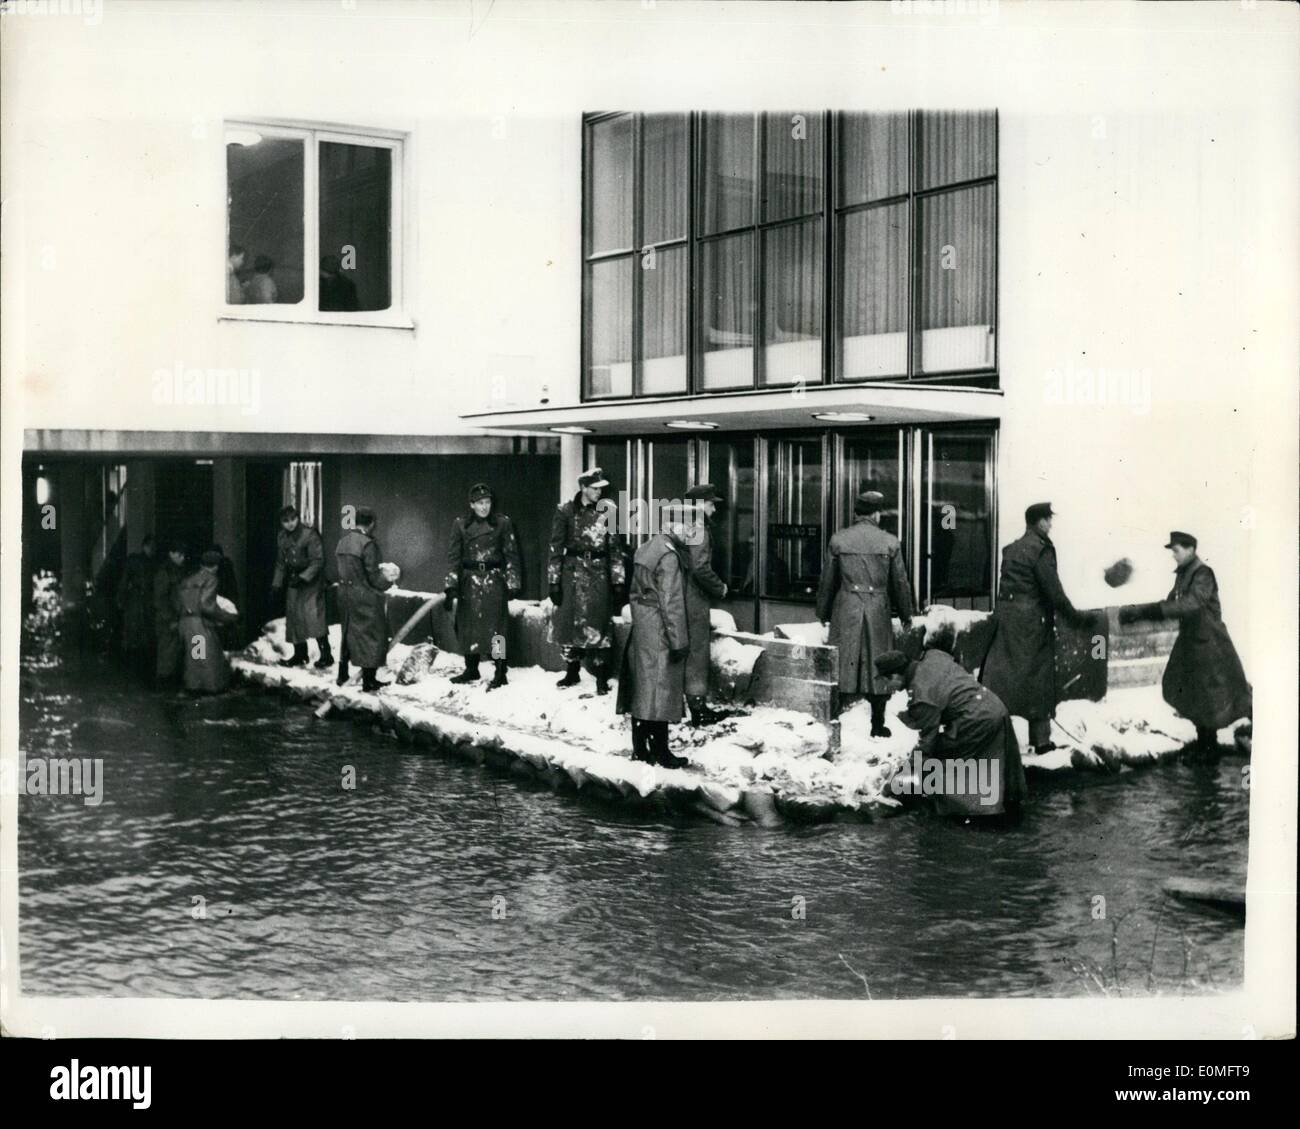 Jan. 01, 1955 - Parliament Building In Bonn - Surrounded By Floods Headquarters Of West German Government Threatened: Photo shows The scene at Bonn this morning - showing the West German Parliament Building surrounded by the ever rising flood waters - which new threaten to initiate thousands of miles of land throughout Europe. West German Police are seen trying to keep out the waters. Stock Photo